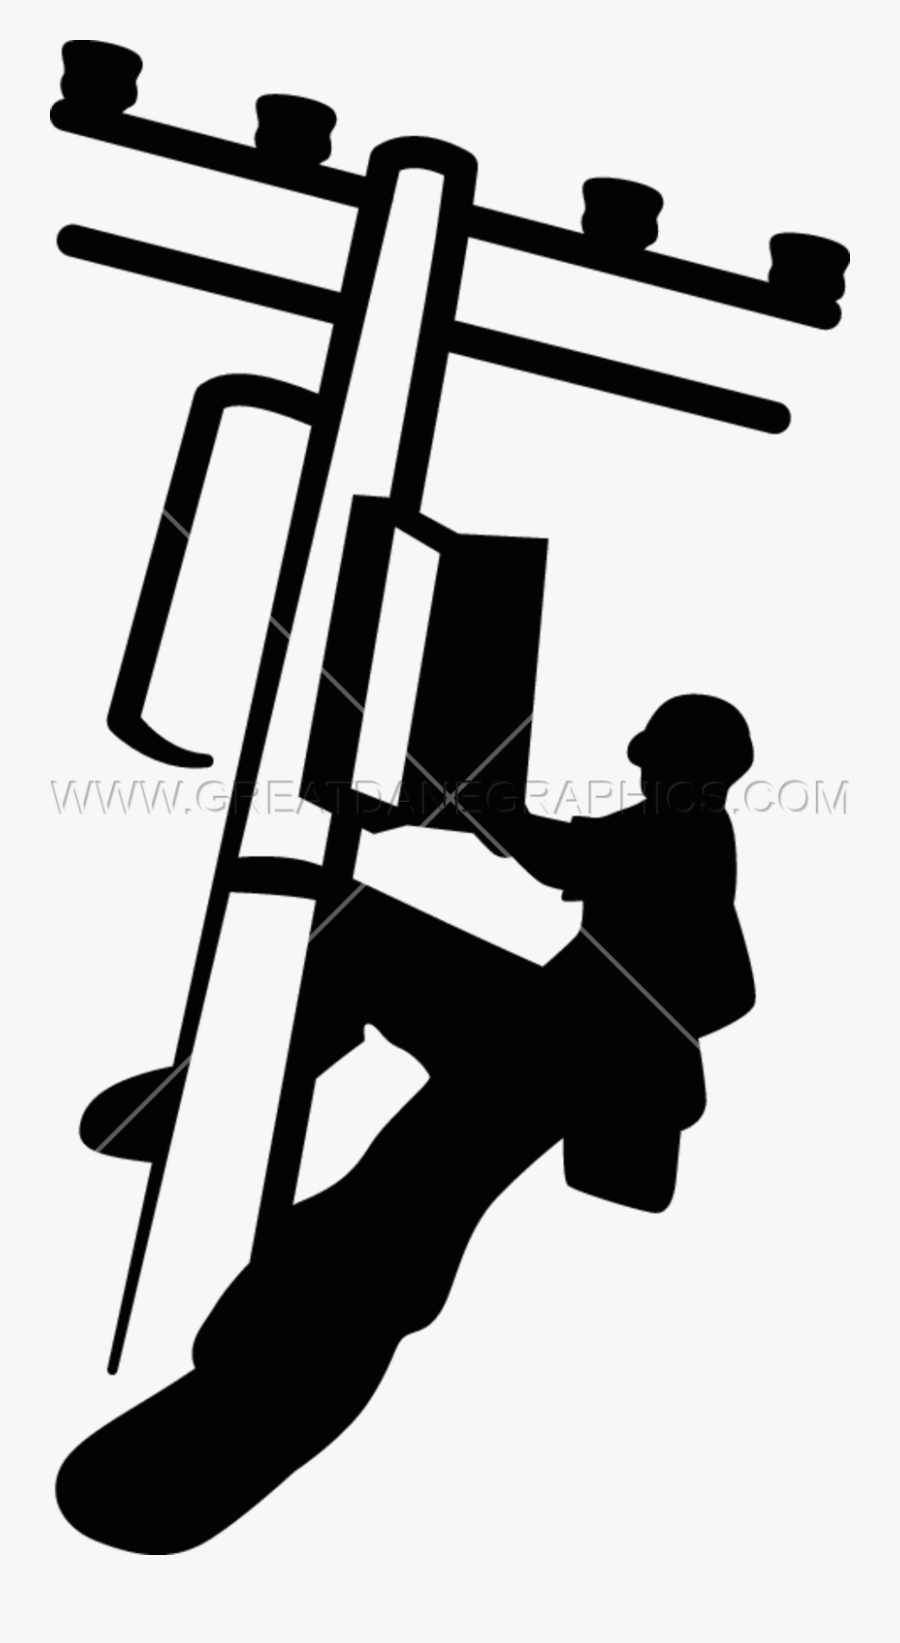 Electric Lineman Png Clipart Lineworker Clip Art - Electrical Line Man .png, Transparent Clipart